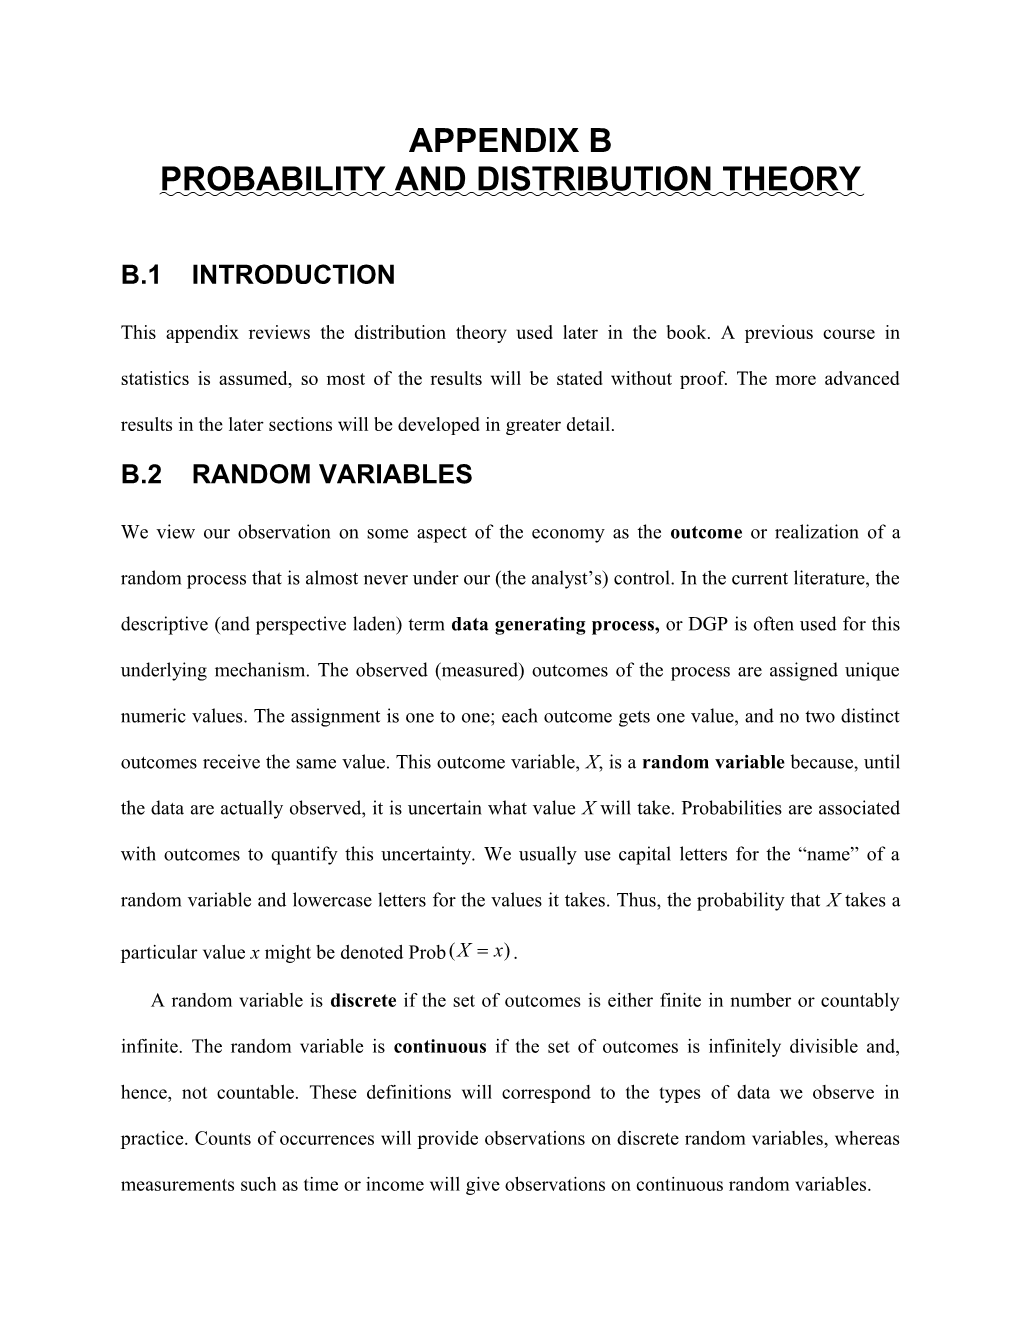 Probability and Distribution Theory